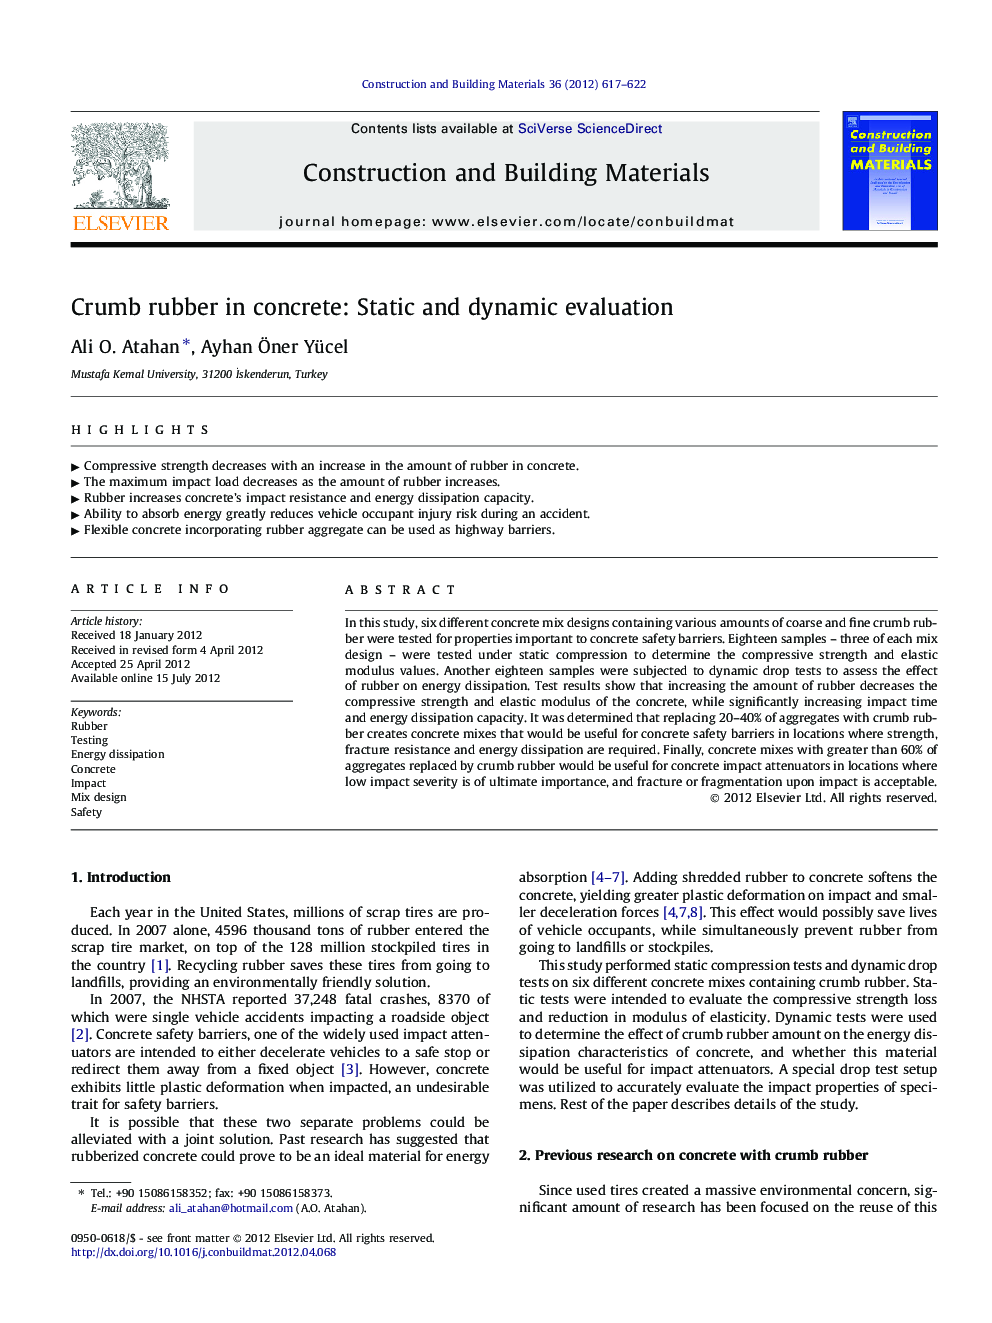 Crumb rubber in concrete: Static and dynamic evaluation